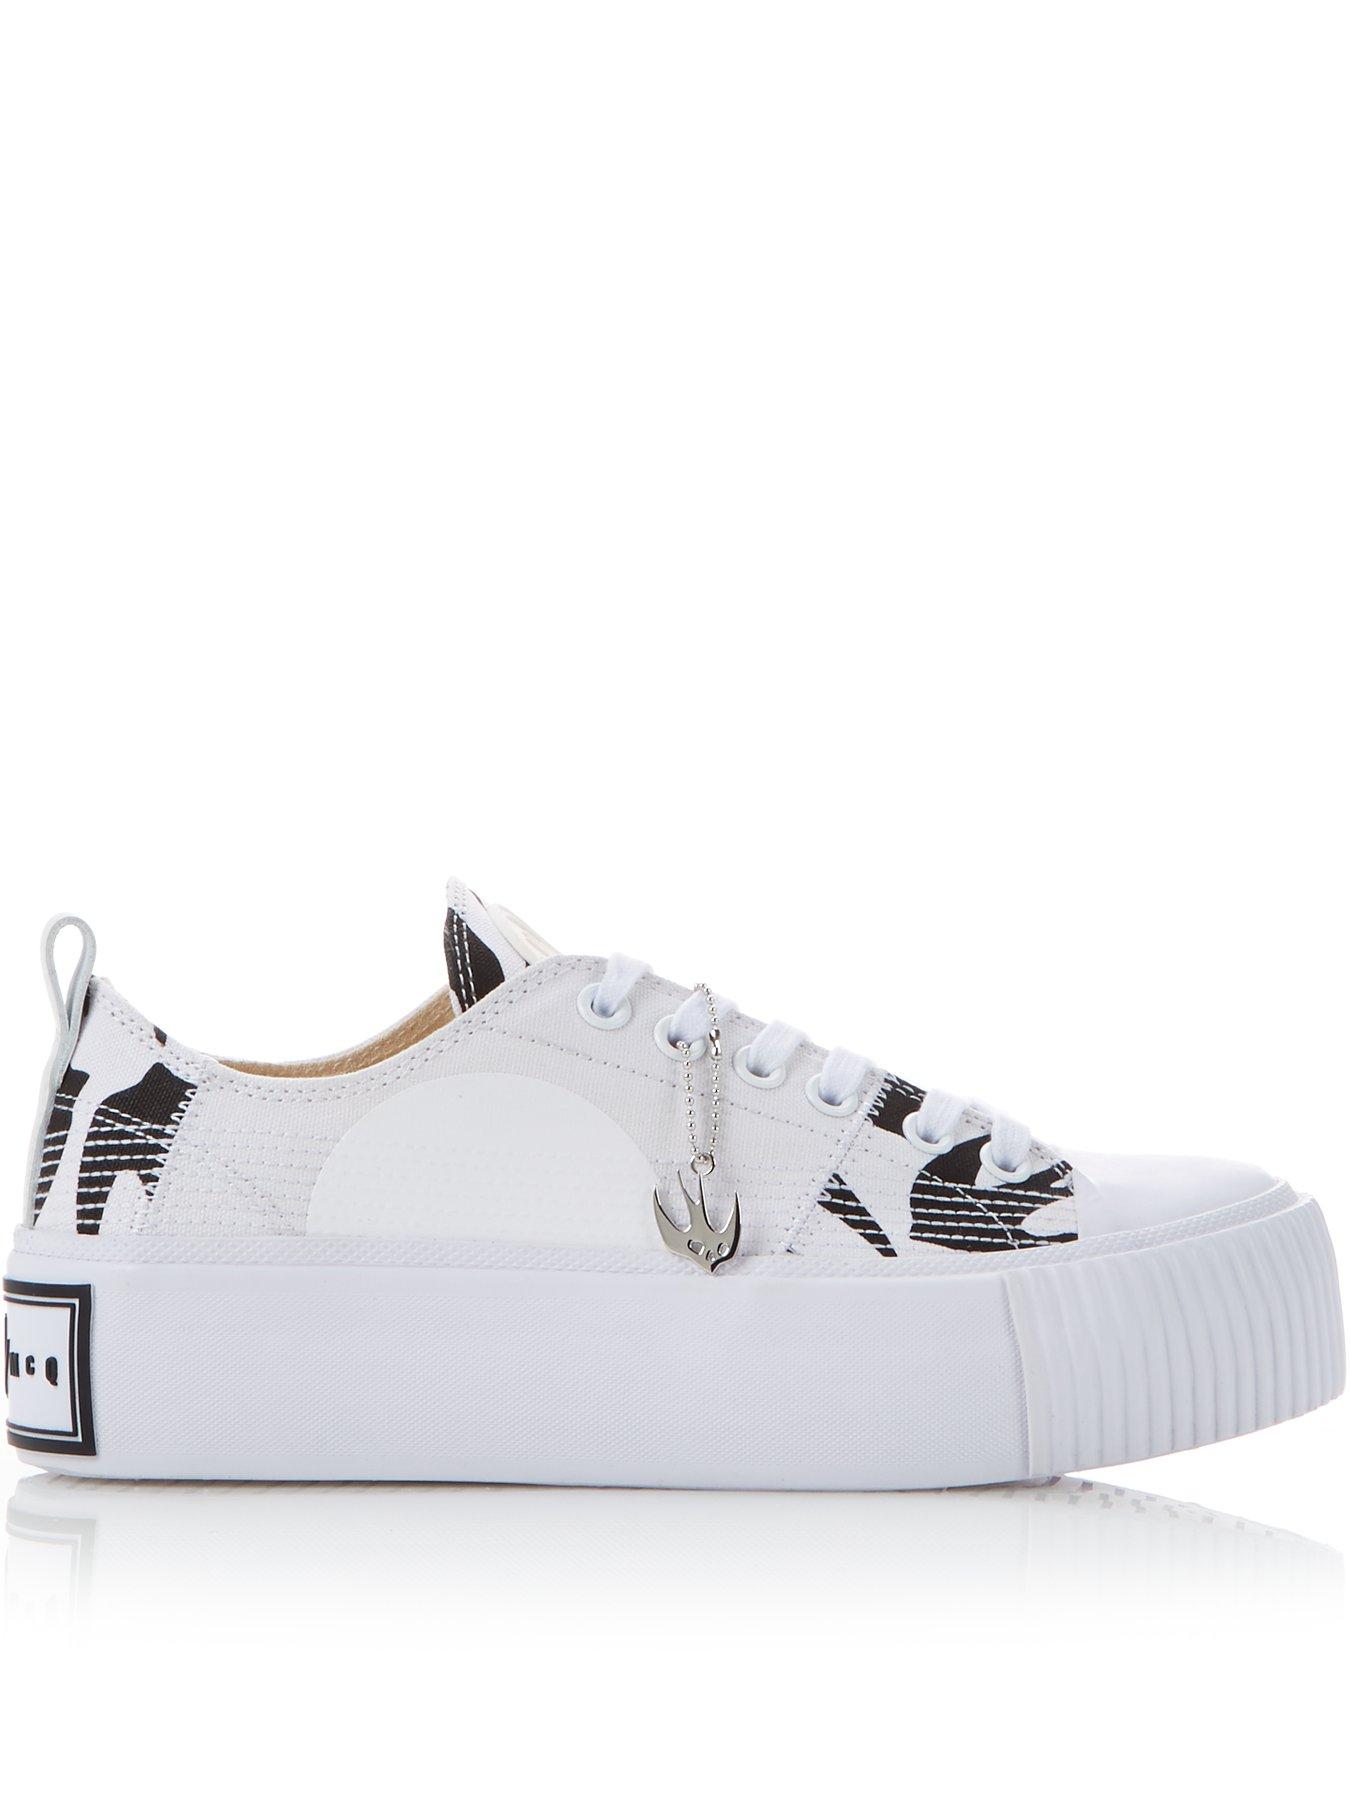 alexander mcqueen trainers buy now pay later